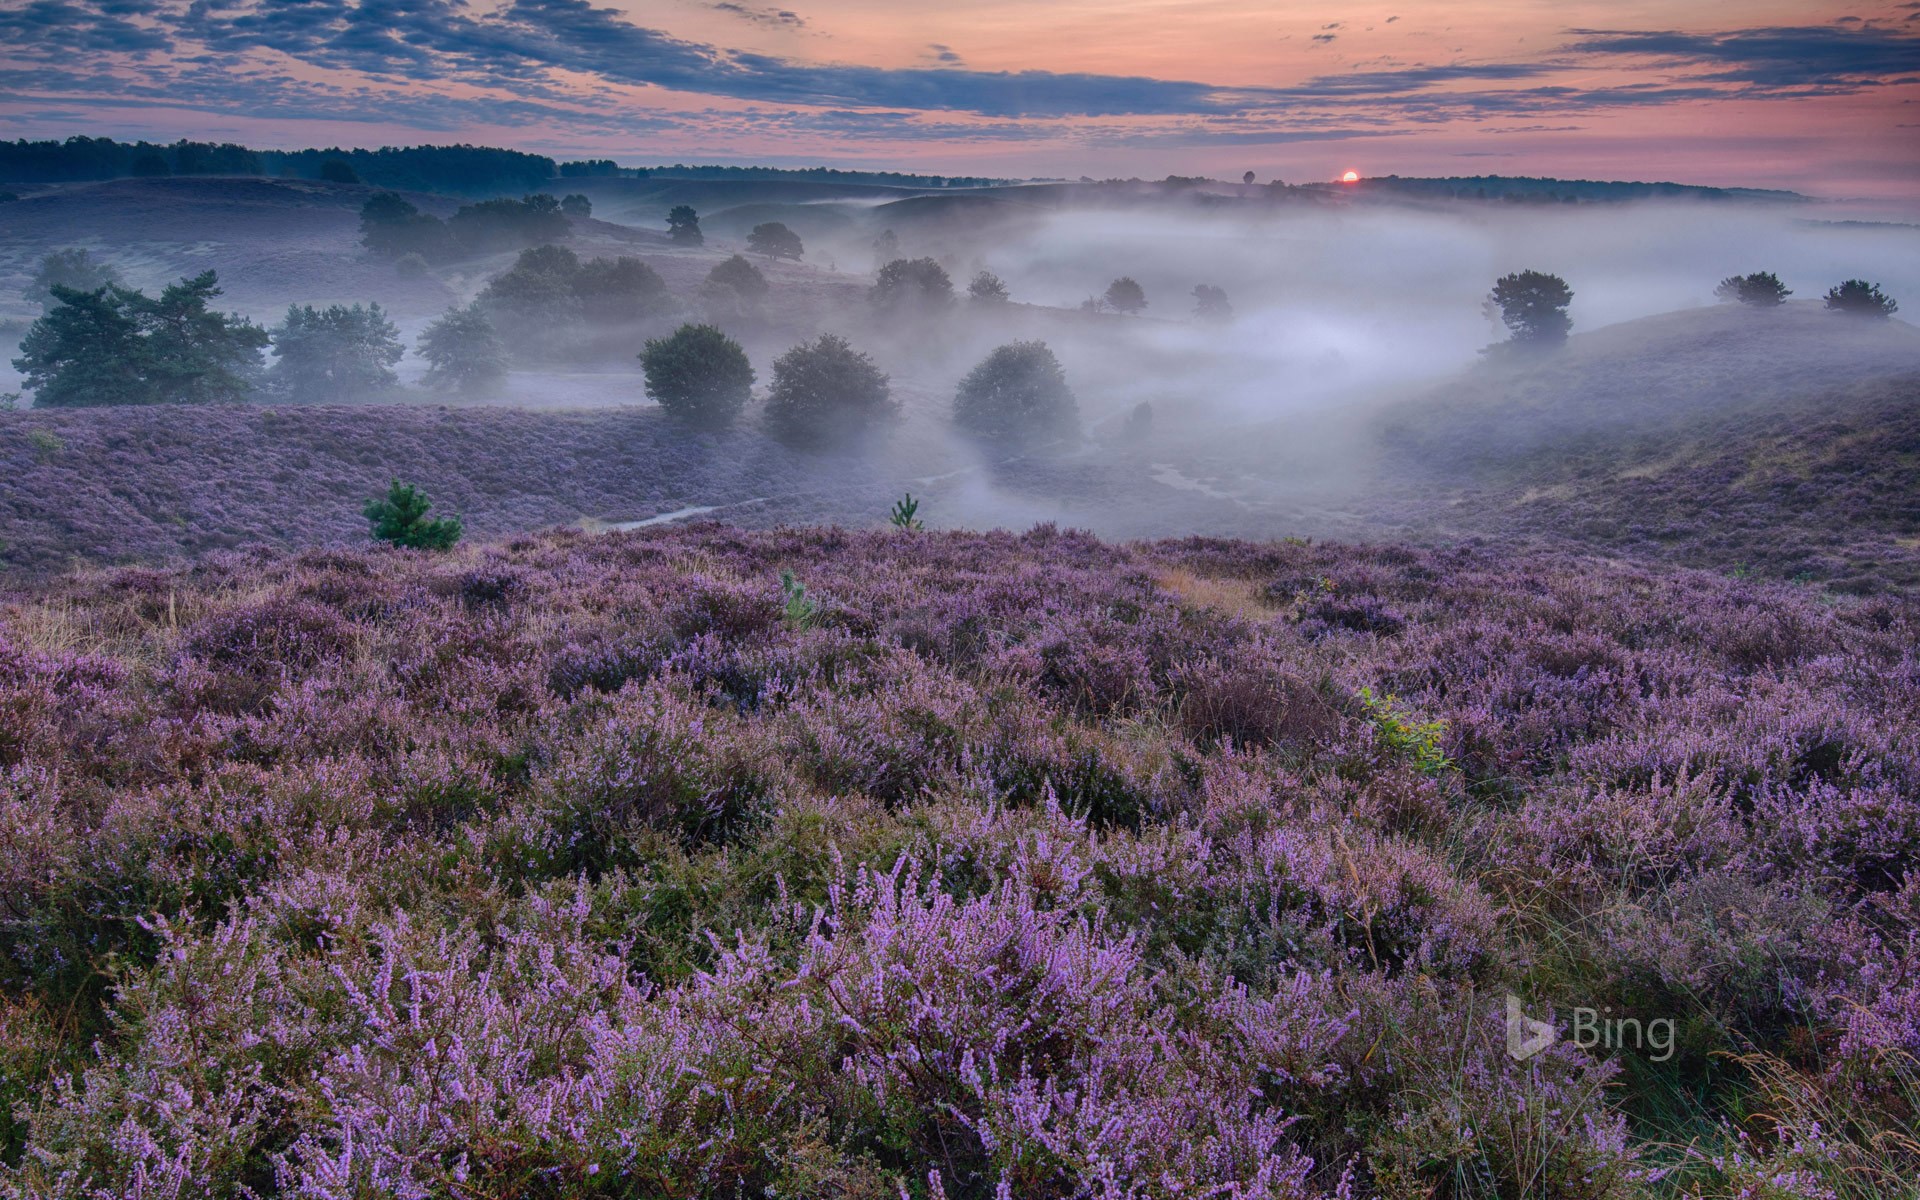 Flowering heather in the Netherlands